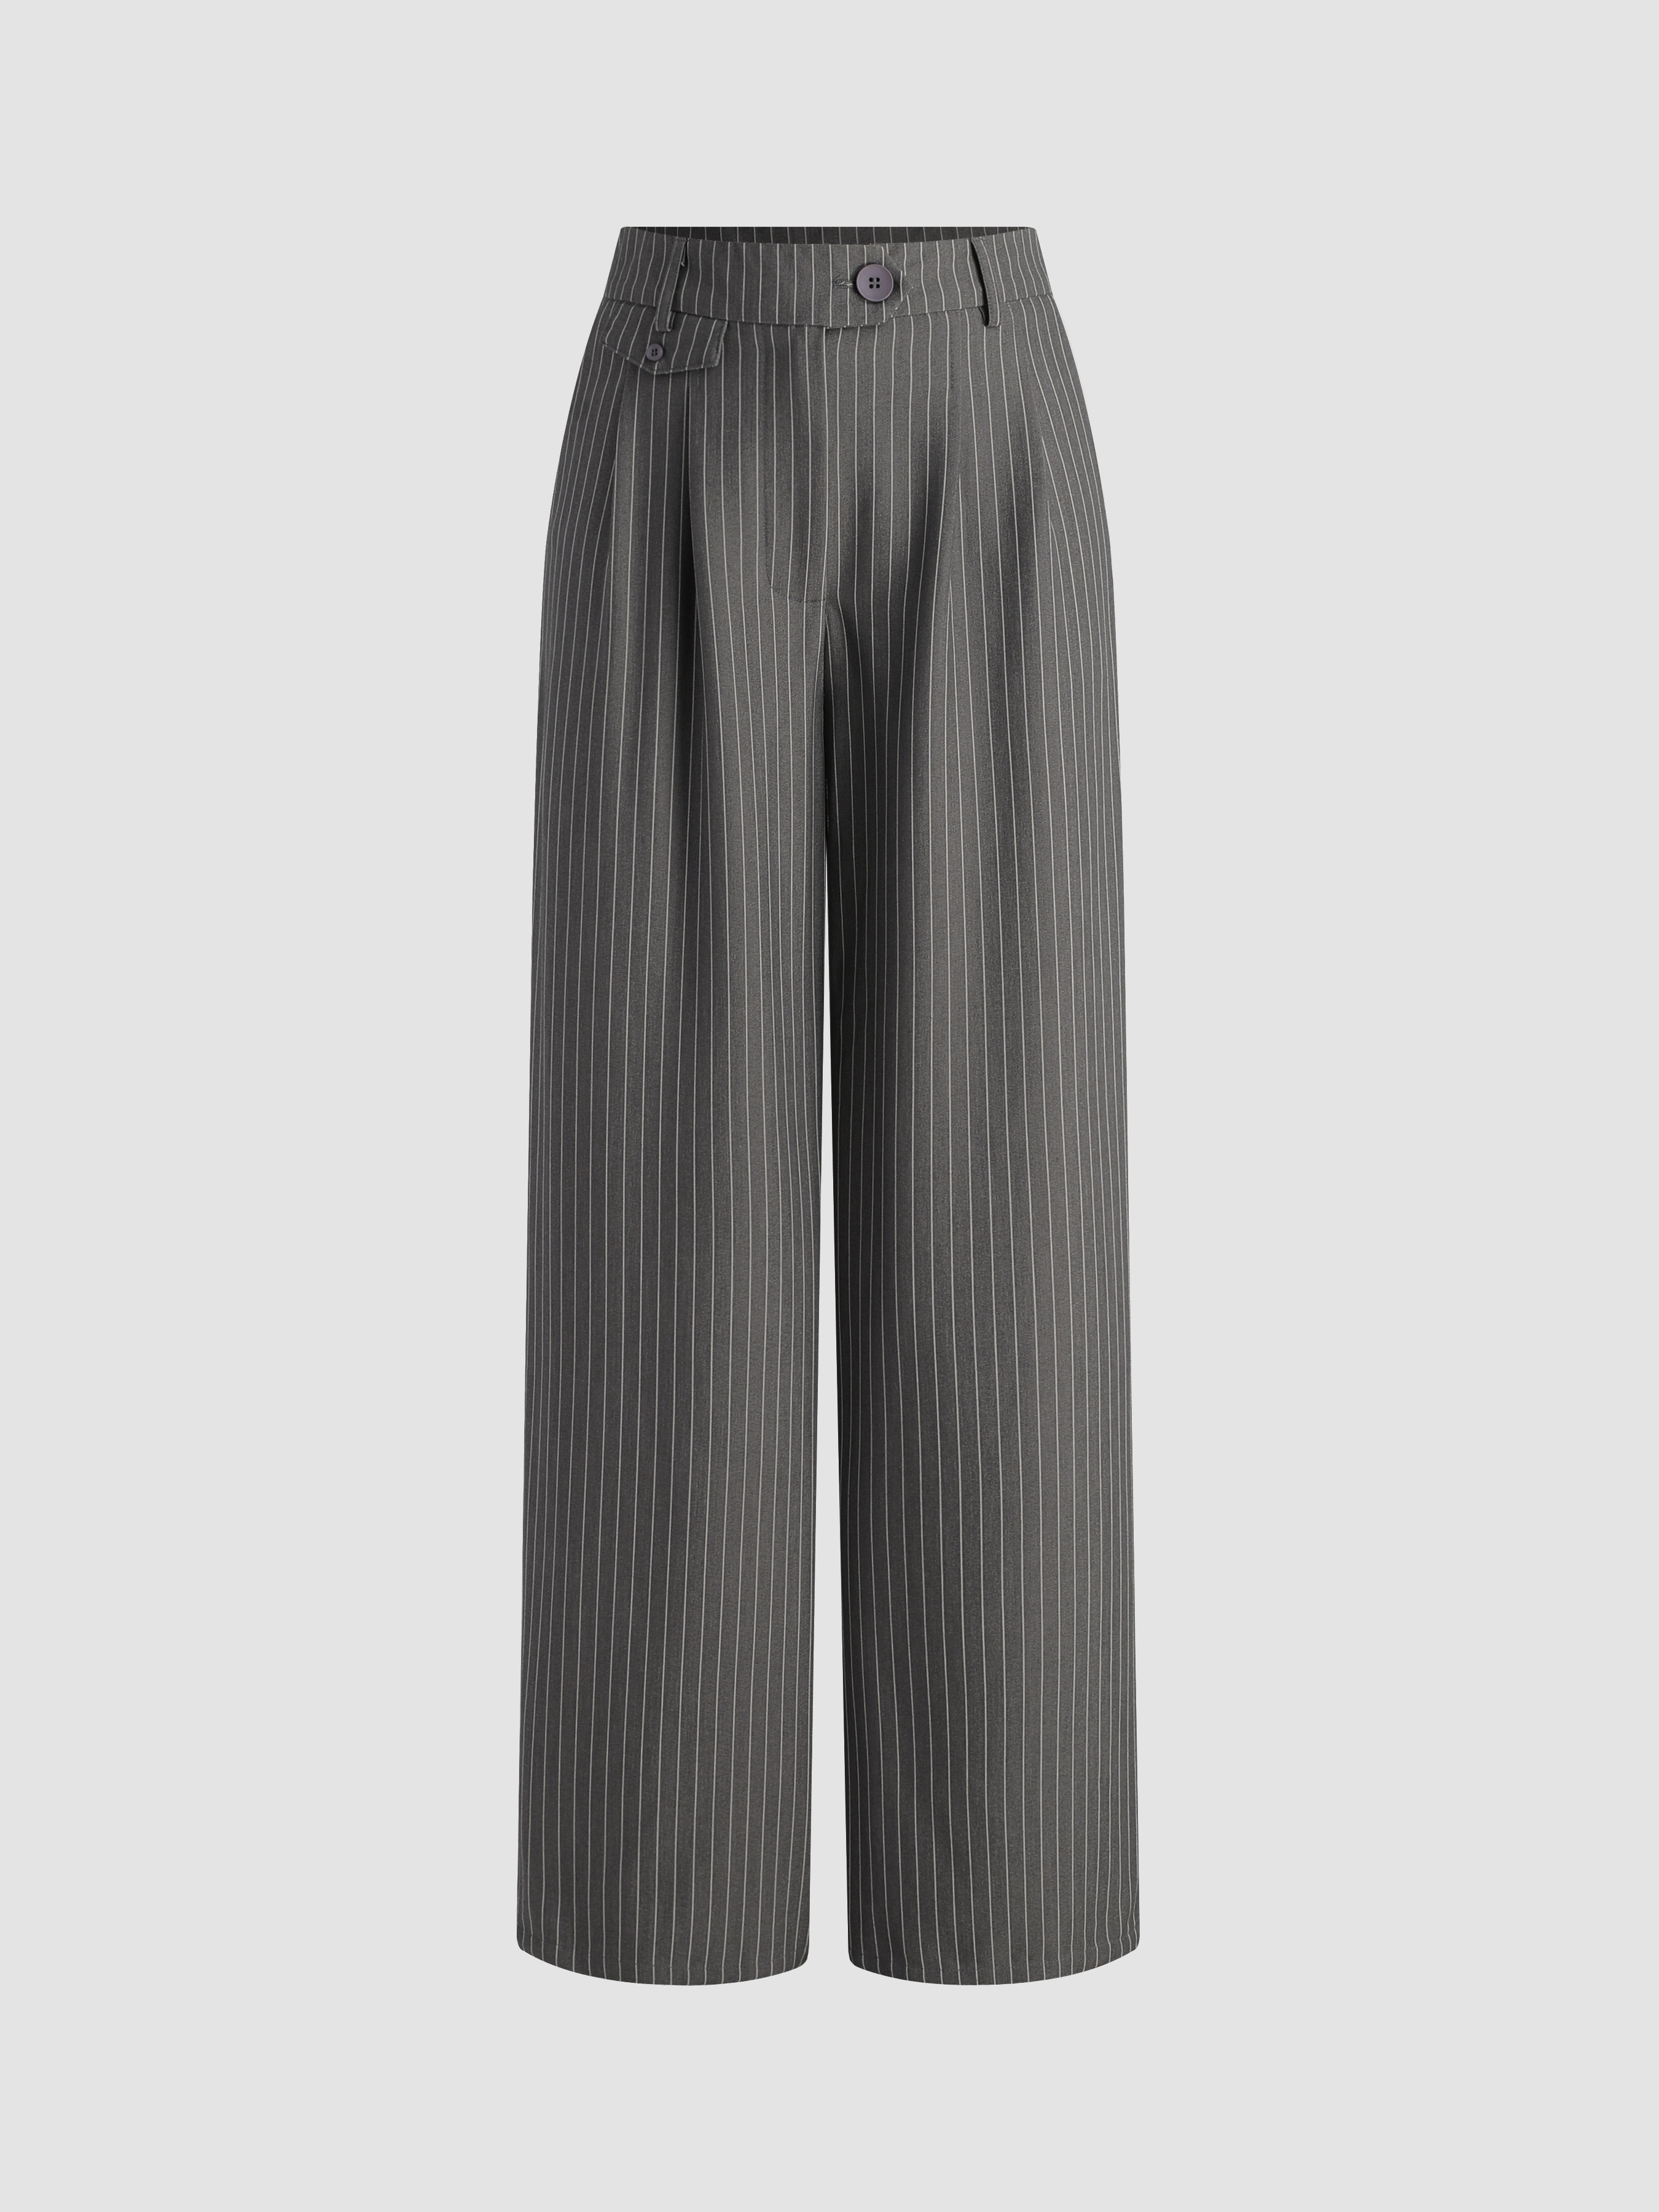 Layfuz Fashion Women Side Striped Pants Trousers Casual High Elastic Waist  Drawstring Slim Pencil Pants : Amazon.in: Clothing & Accessories